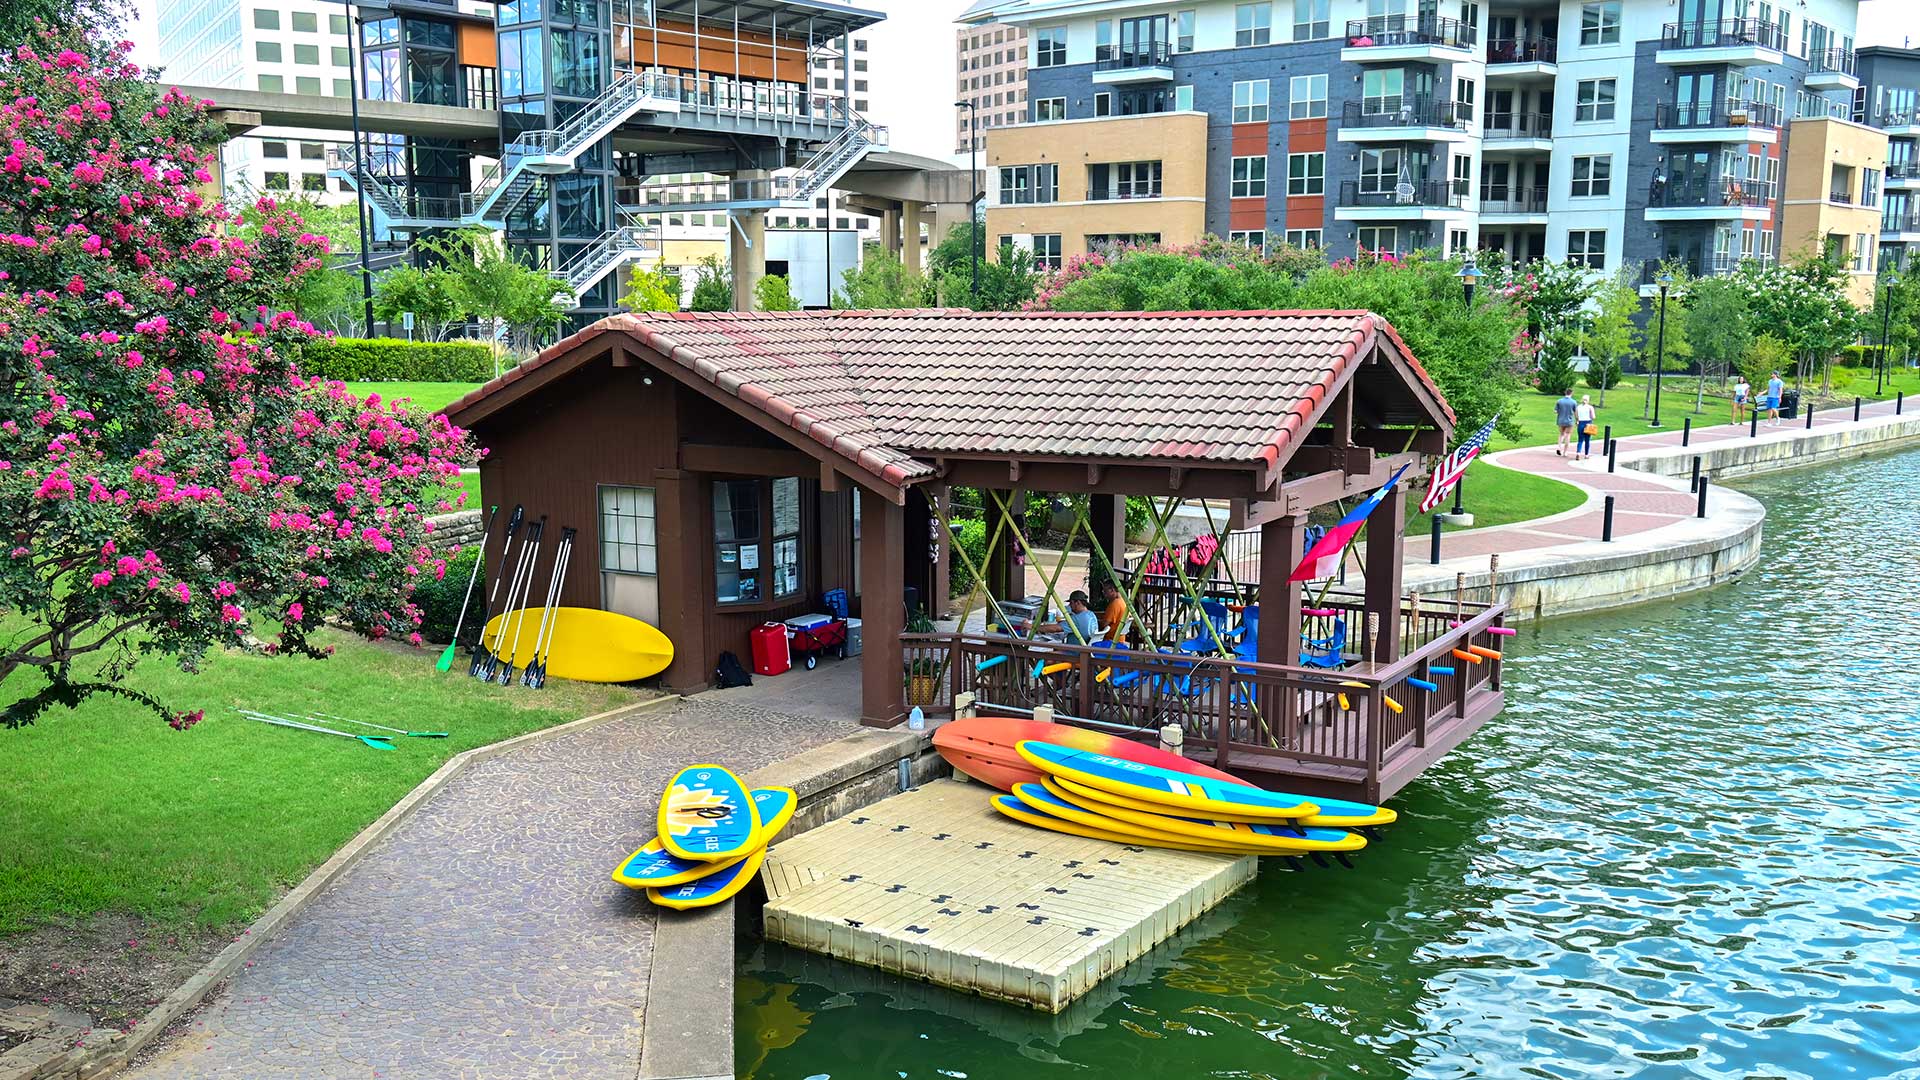 Looking down at a lakeside kiosk to rent kayaks and boards. There is a swim platform floating along the shore with several boards stack. A brick walkway follows the shoreline off to the right with apartment buildings behind.